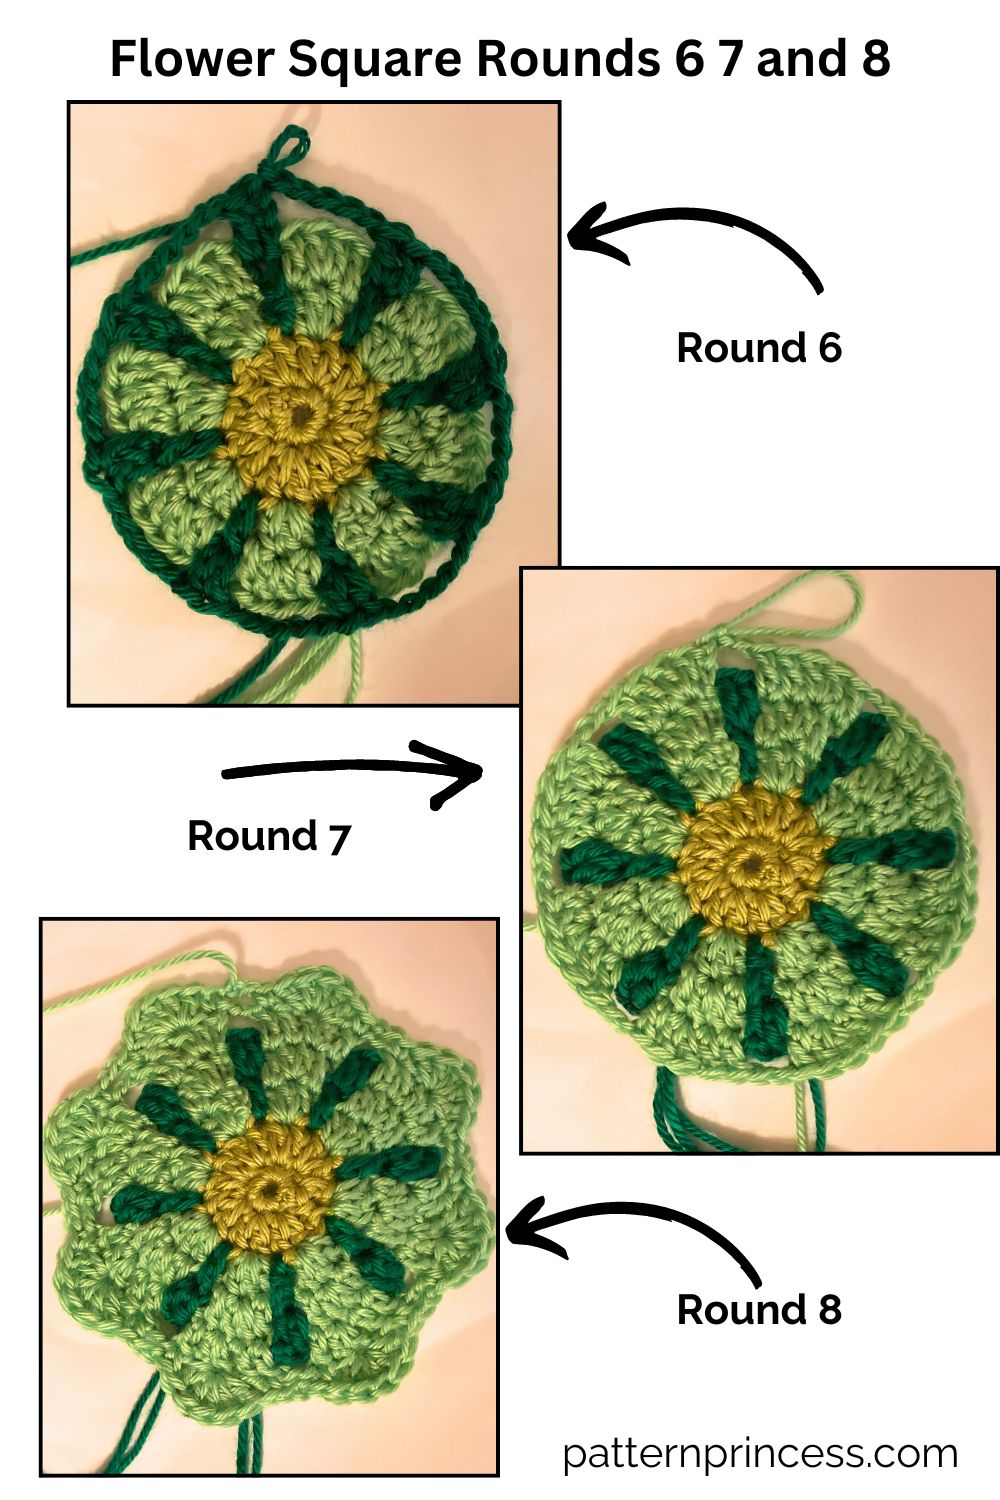 Flower Square Rounds 6 7 and 8